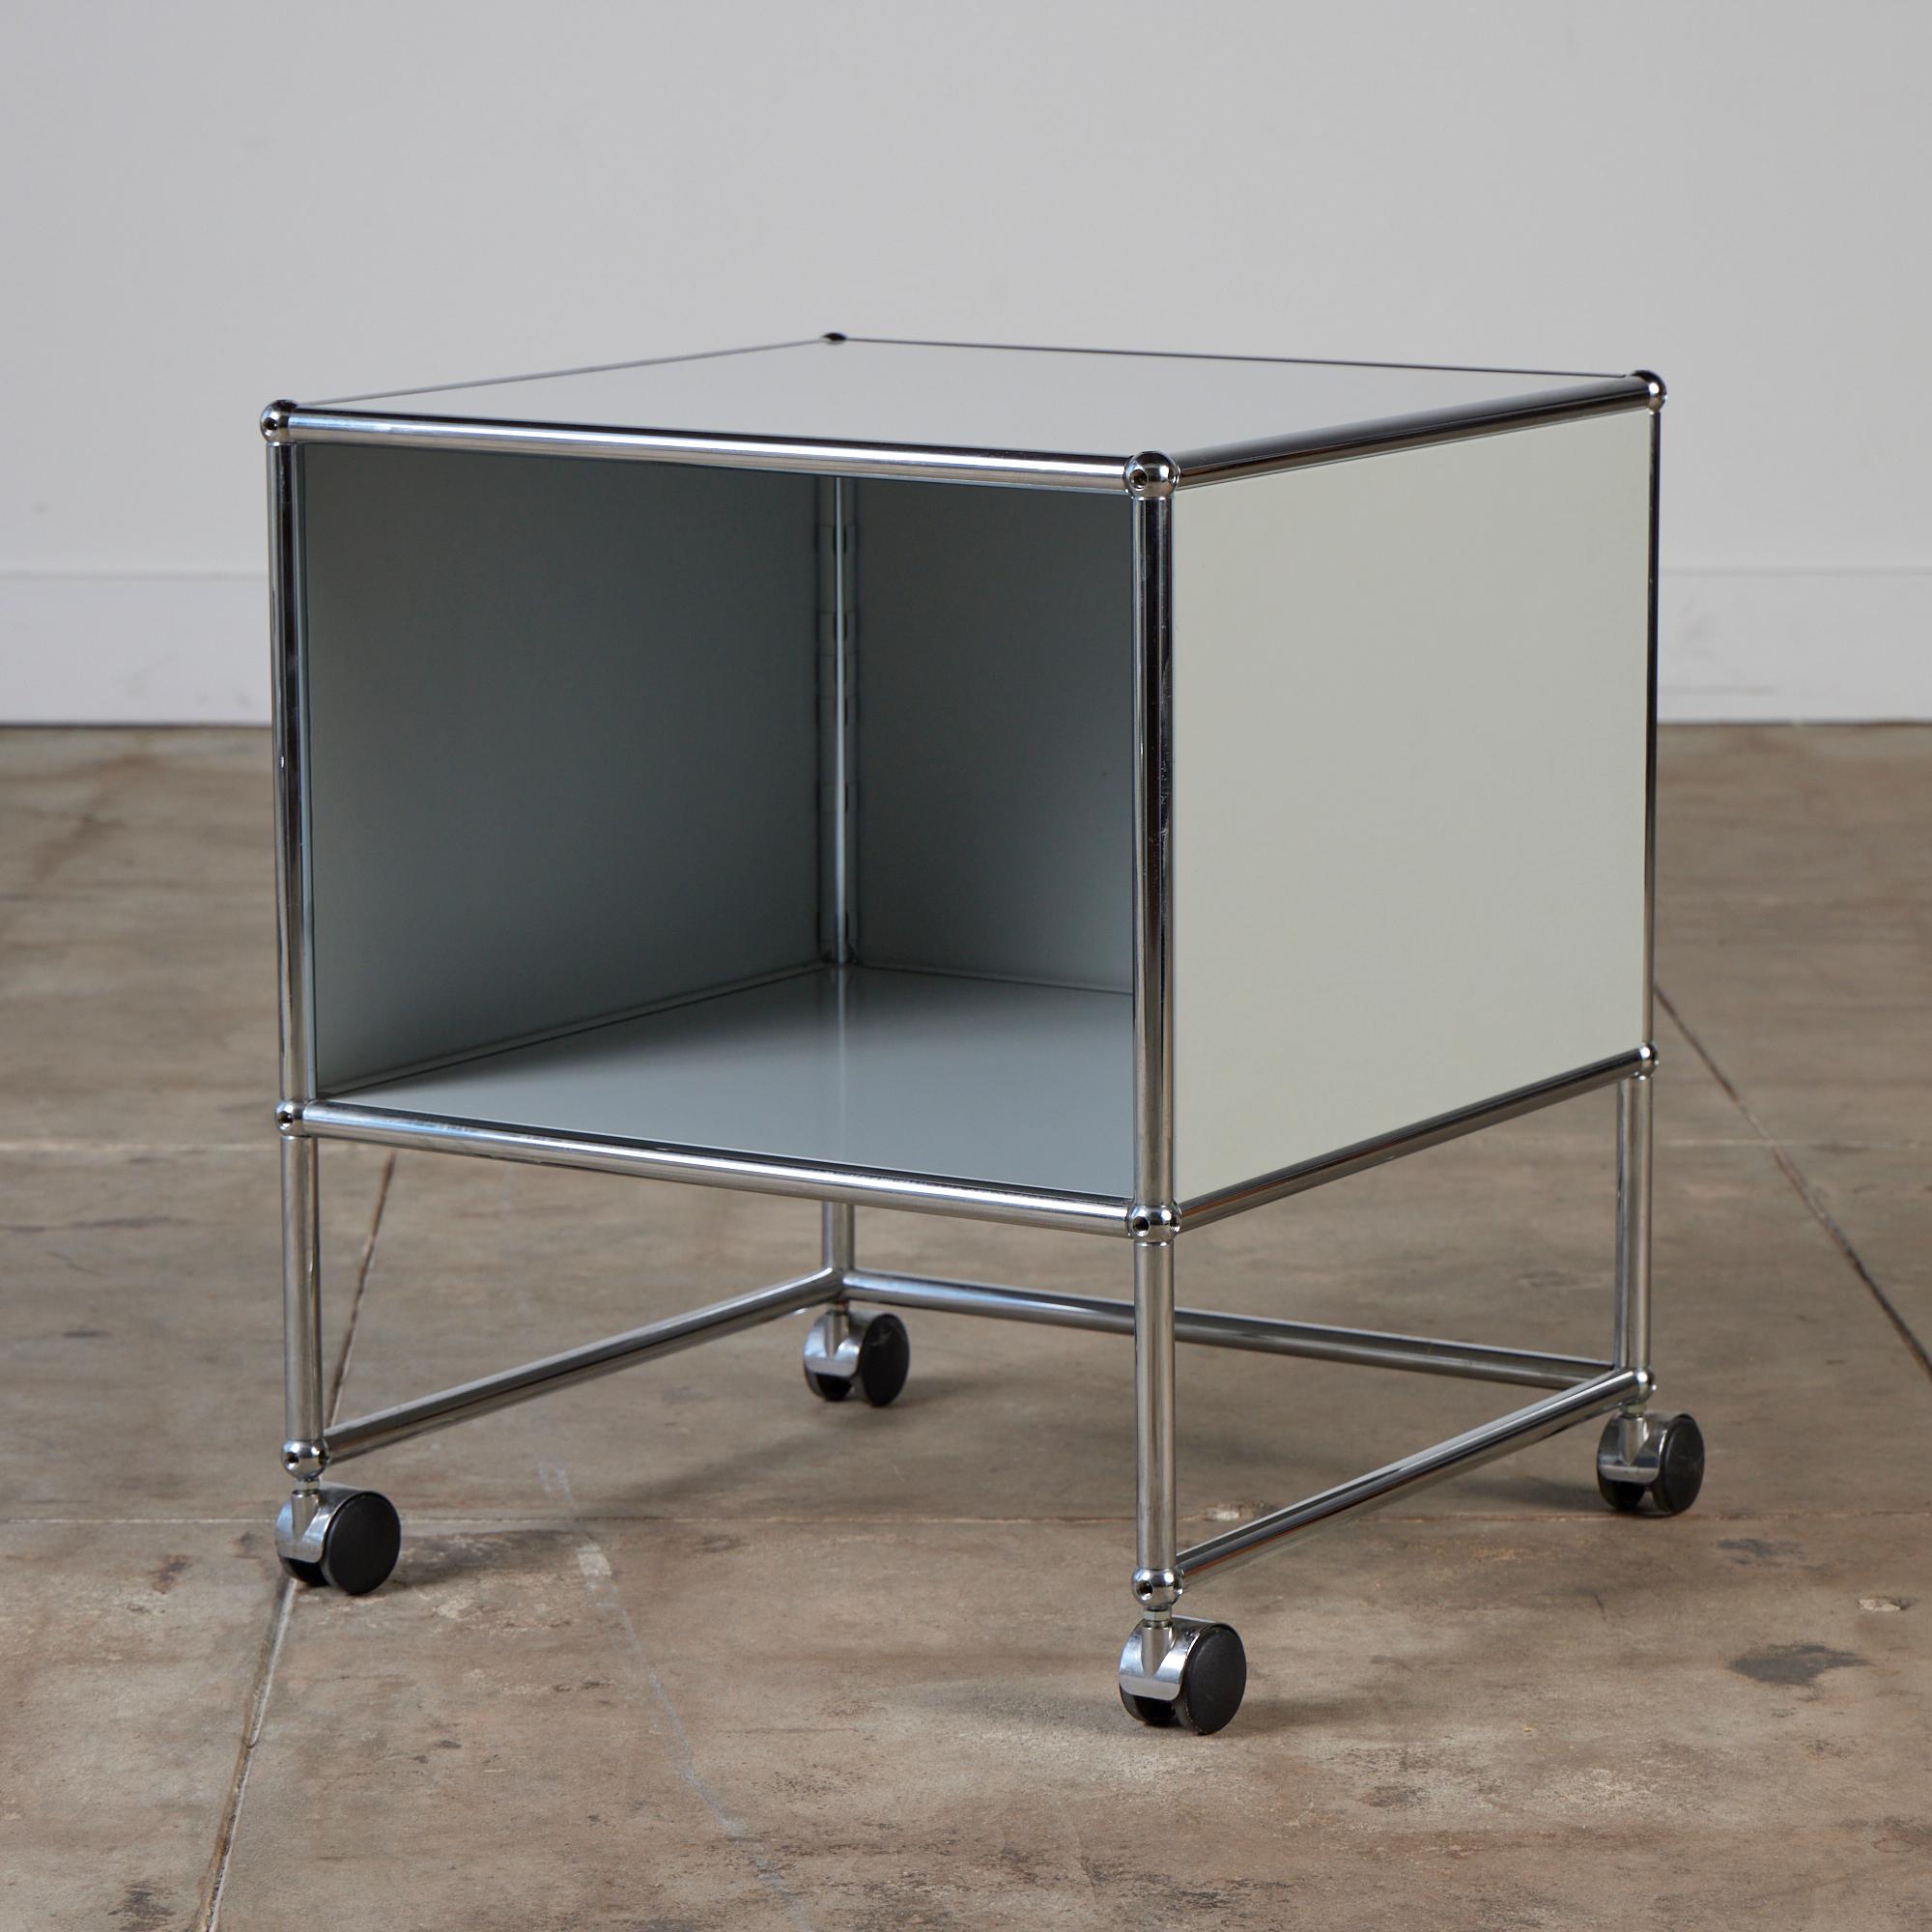 Architect Fritz Haller was commissioned by USM Modular Furniture in the 1960s to create a USM Haller file cabinet. This storage cube, made in Switzerland, was created based on three basic construction elements; a ball, screw in connecting tubes and